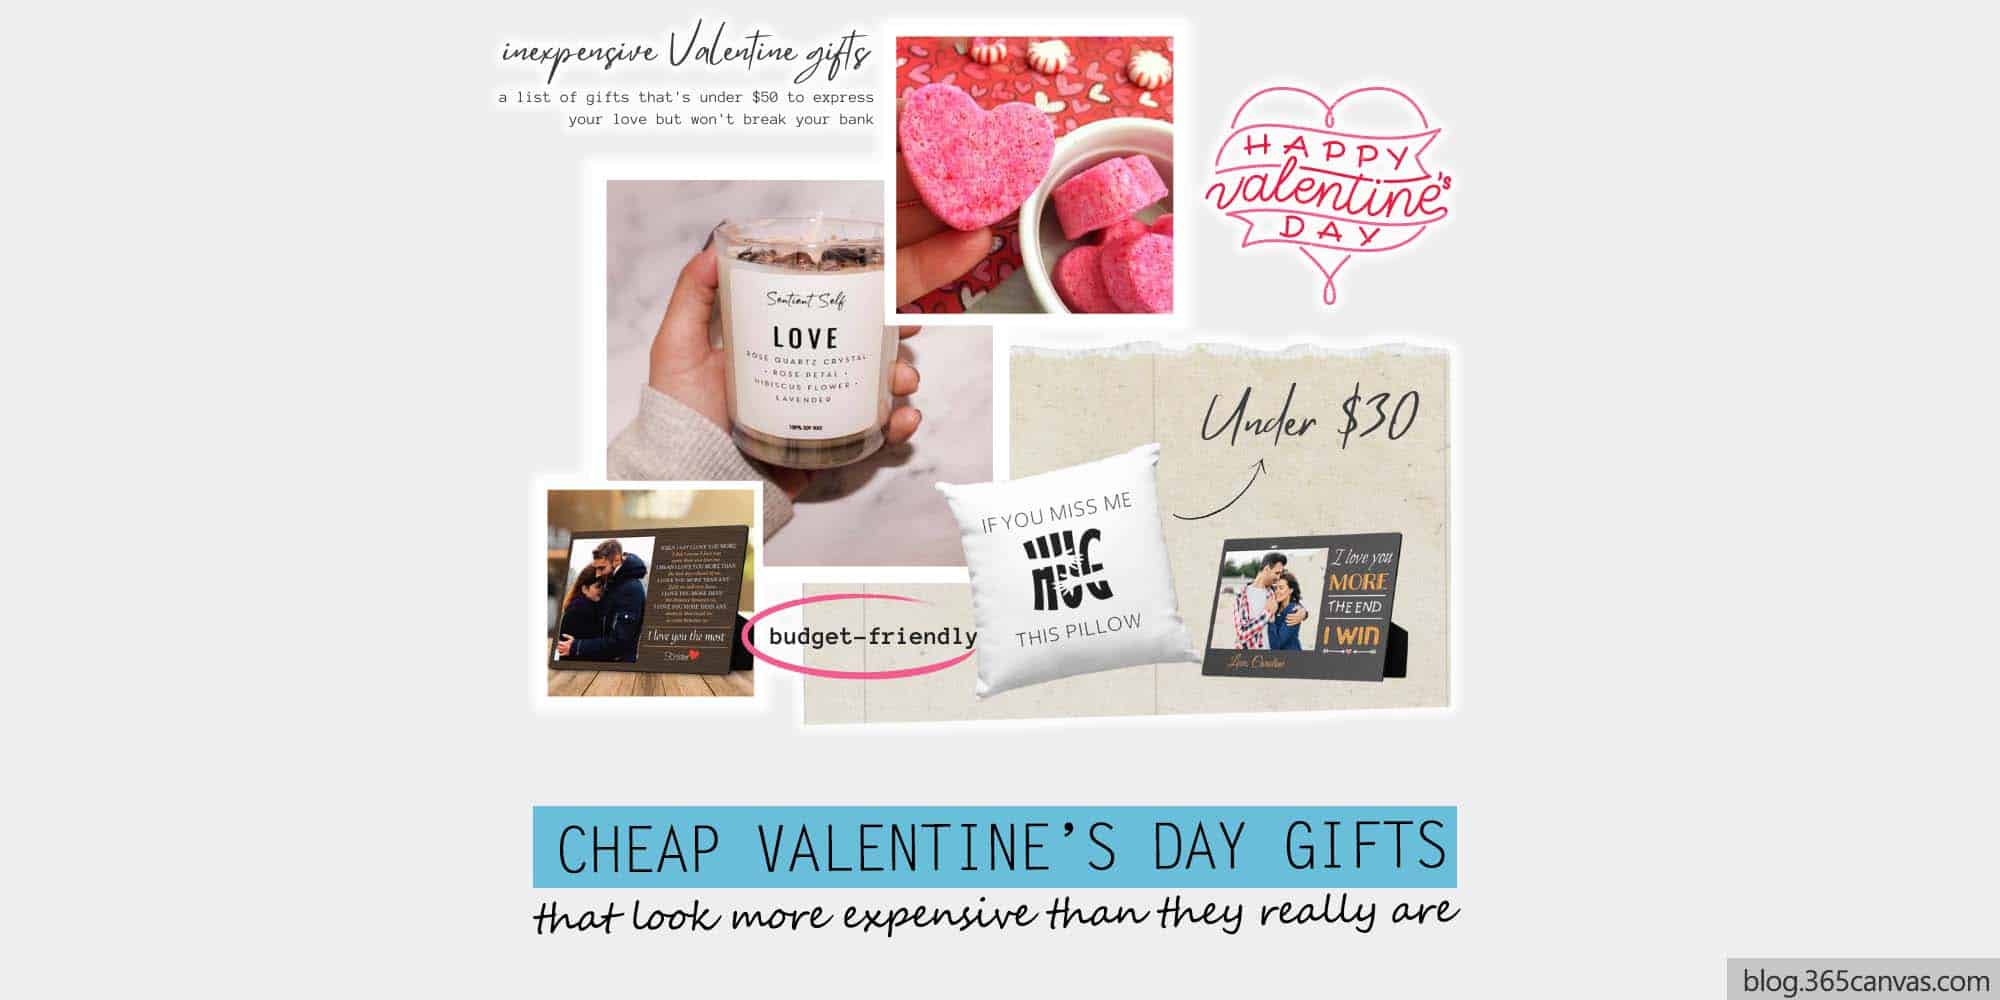 Plan a Valentine's Day Date Night at Home + Gift Ideas to Snuggle up to